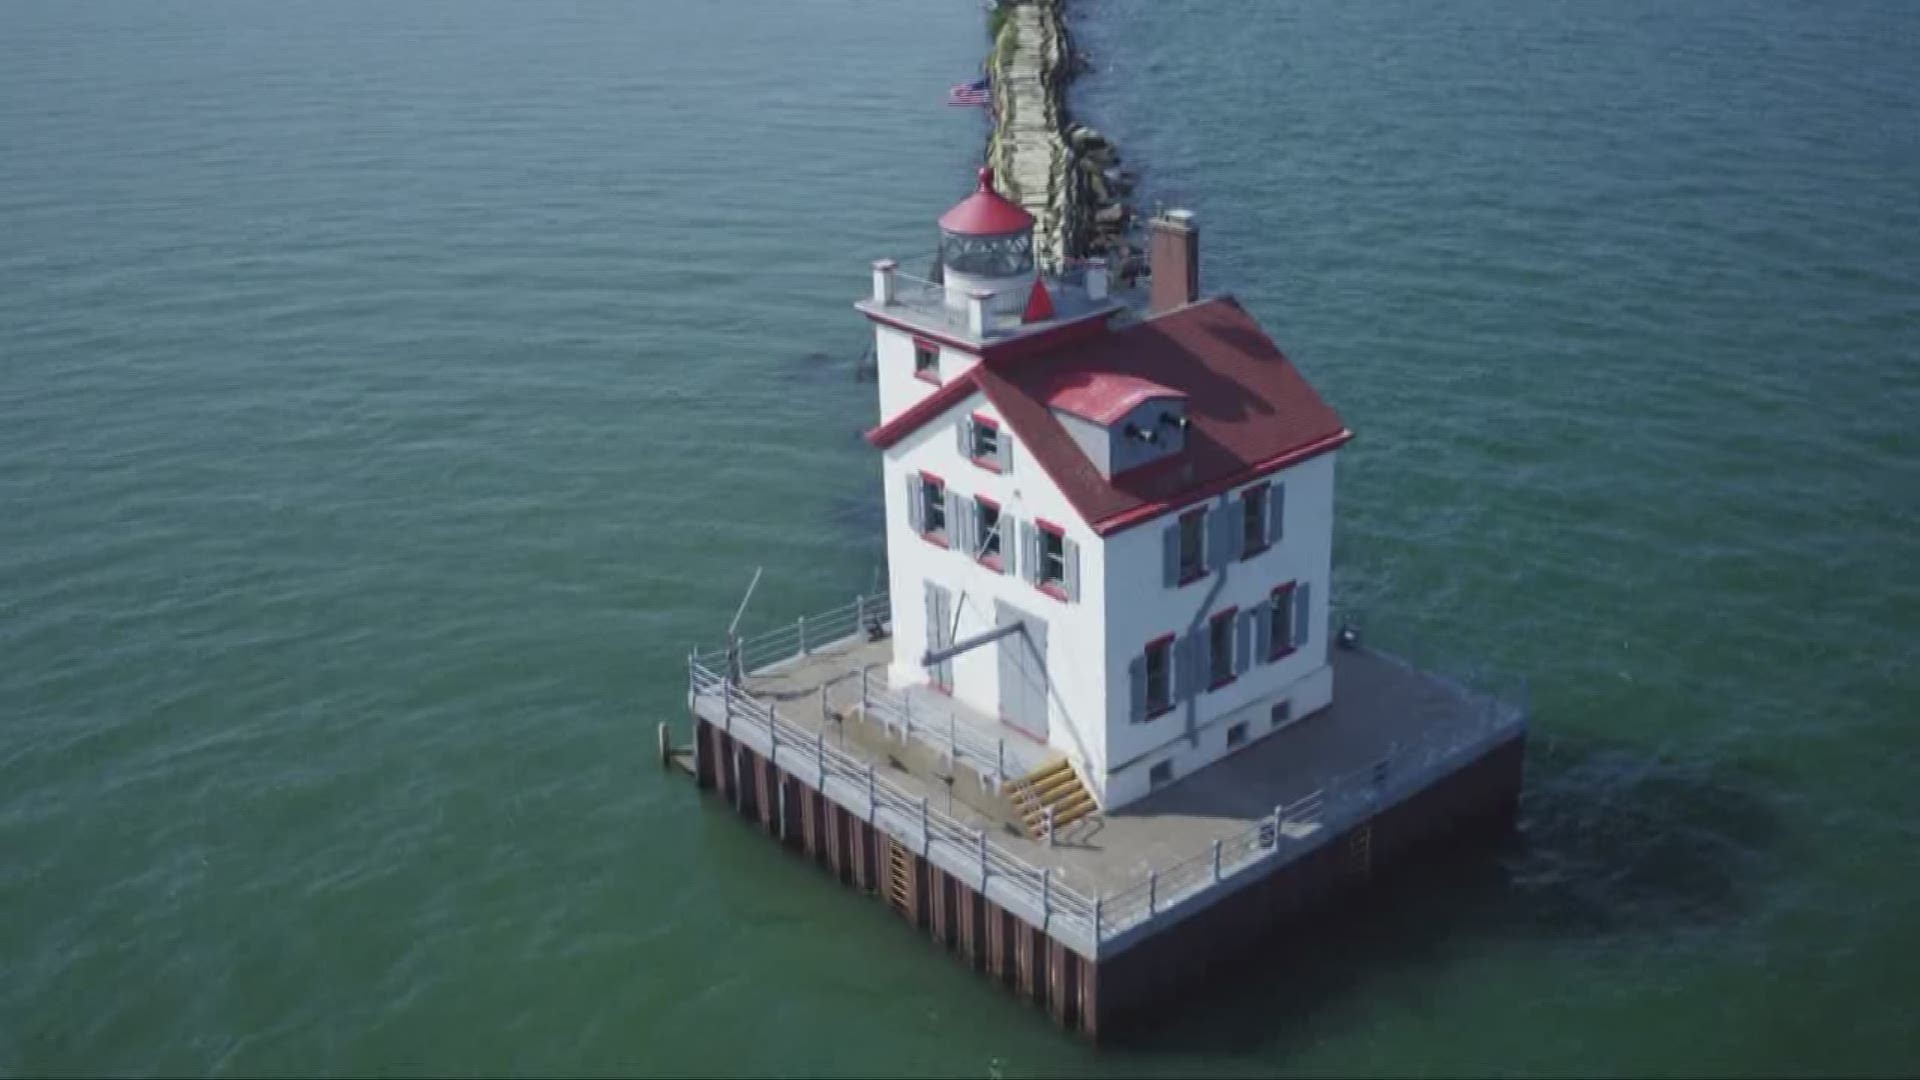 June 28, 2017: The 'Jewel of the Port' -- Lorain's lighthouse -- is turning 100 years old this week. WKYC's Tiffany Tarpley takes us on a tour of the historic building.